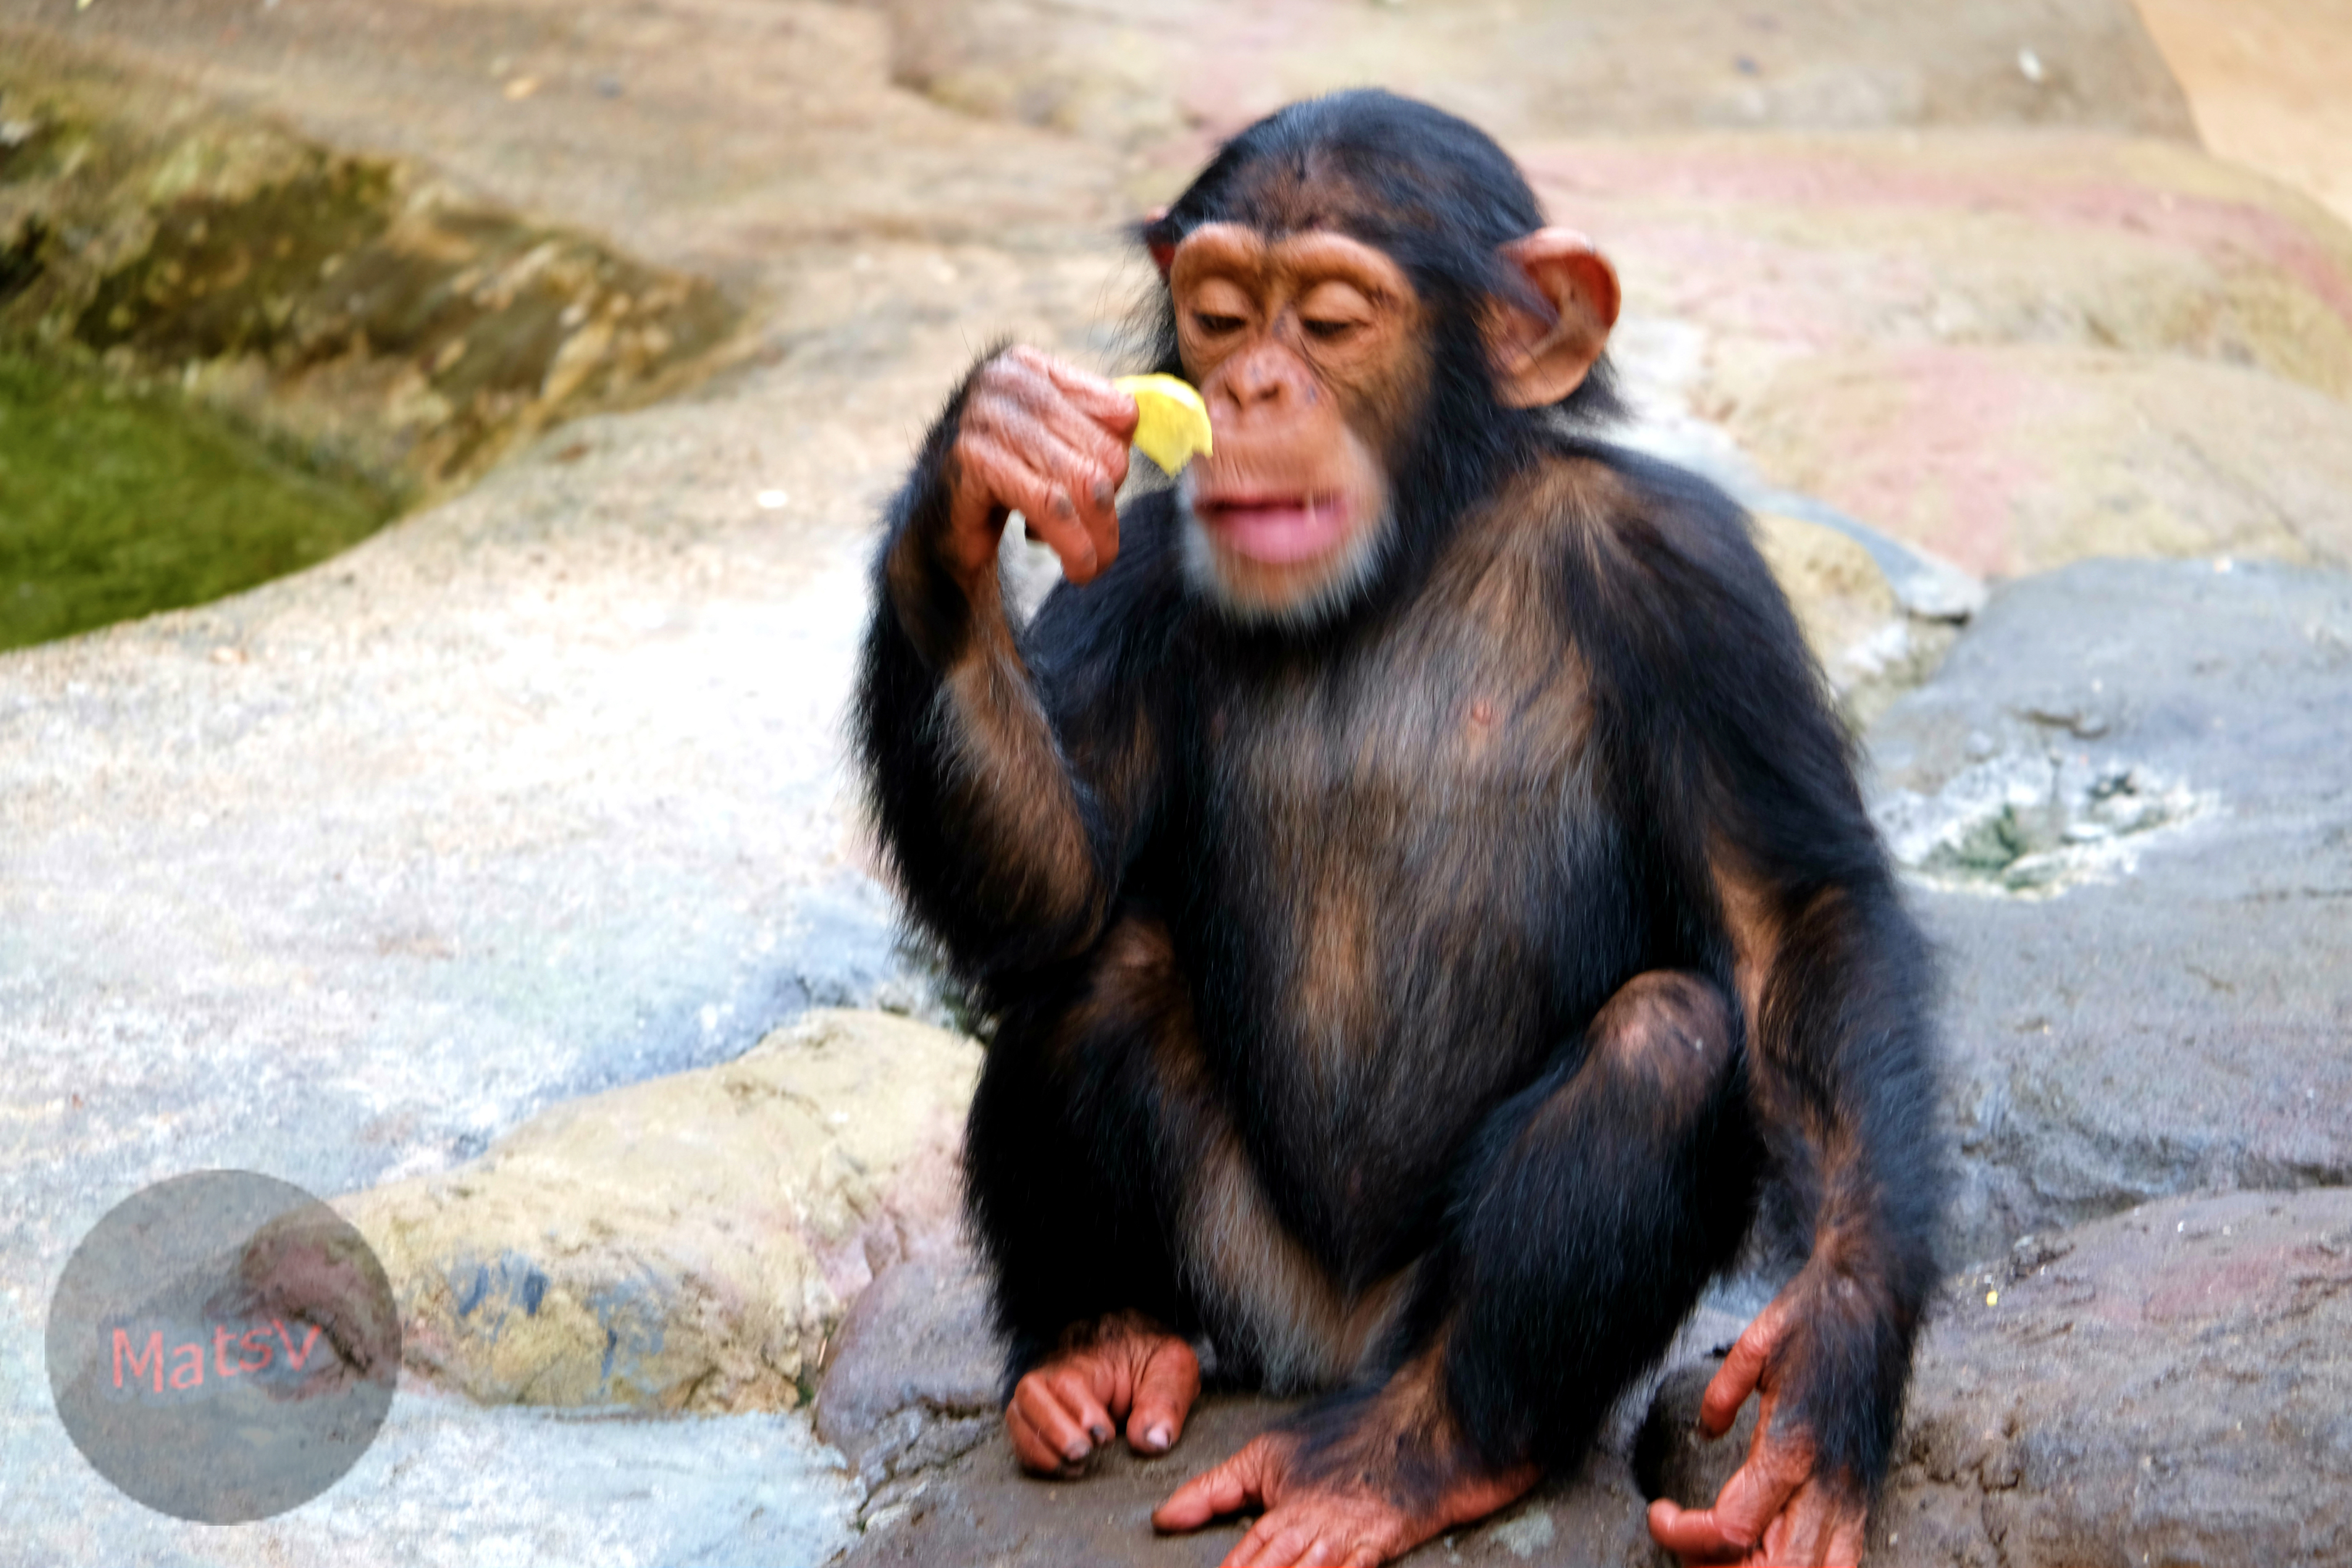 A chimp eating a chip.